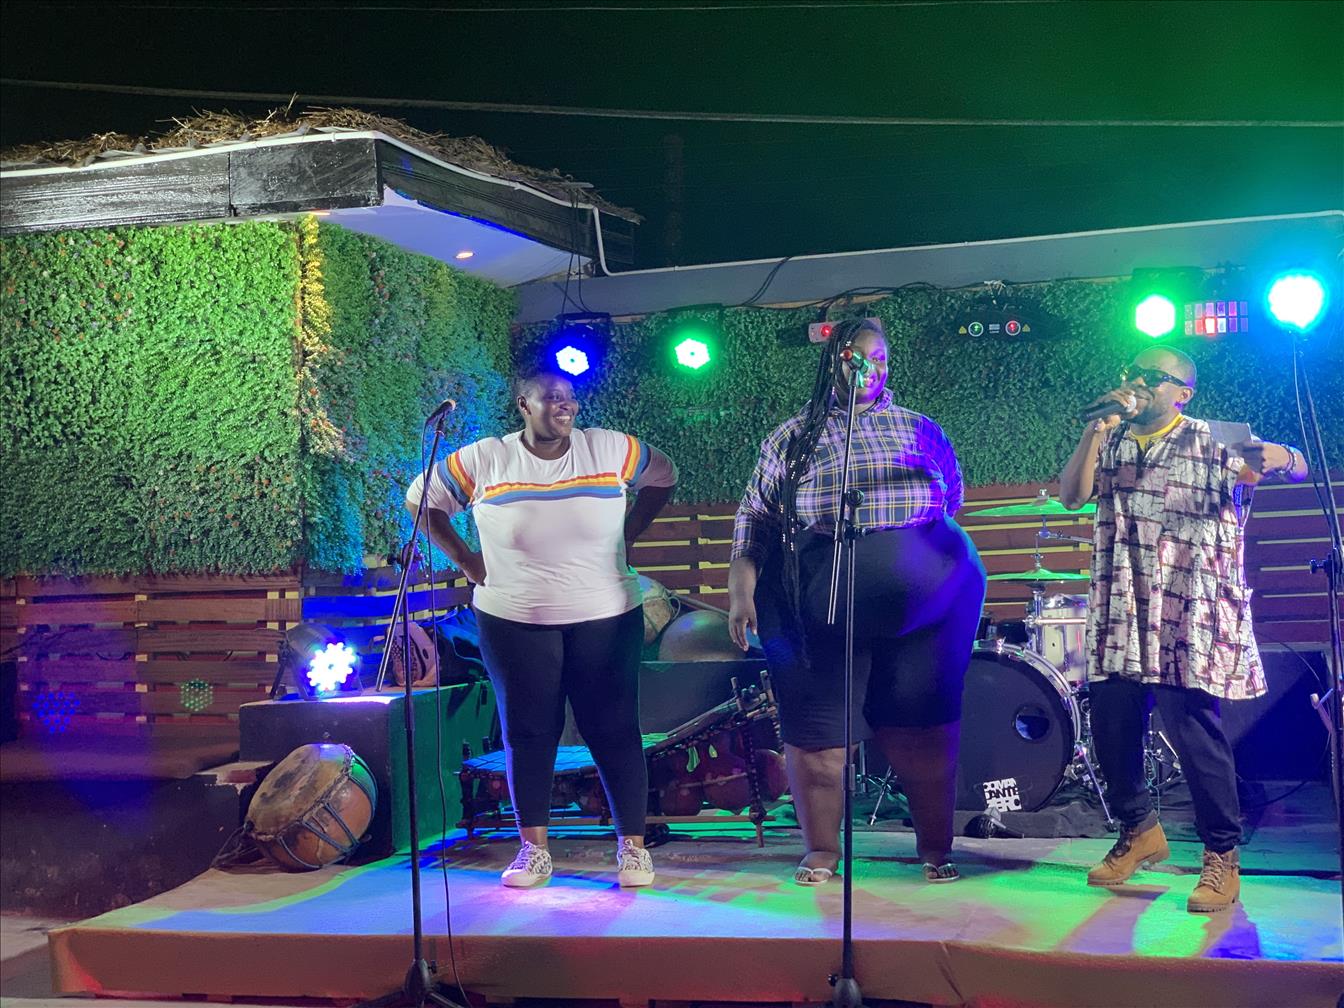 Ghanaian Women In Dance Reality Show Challenge Stereotypes About Obesity